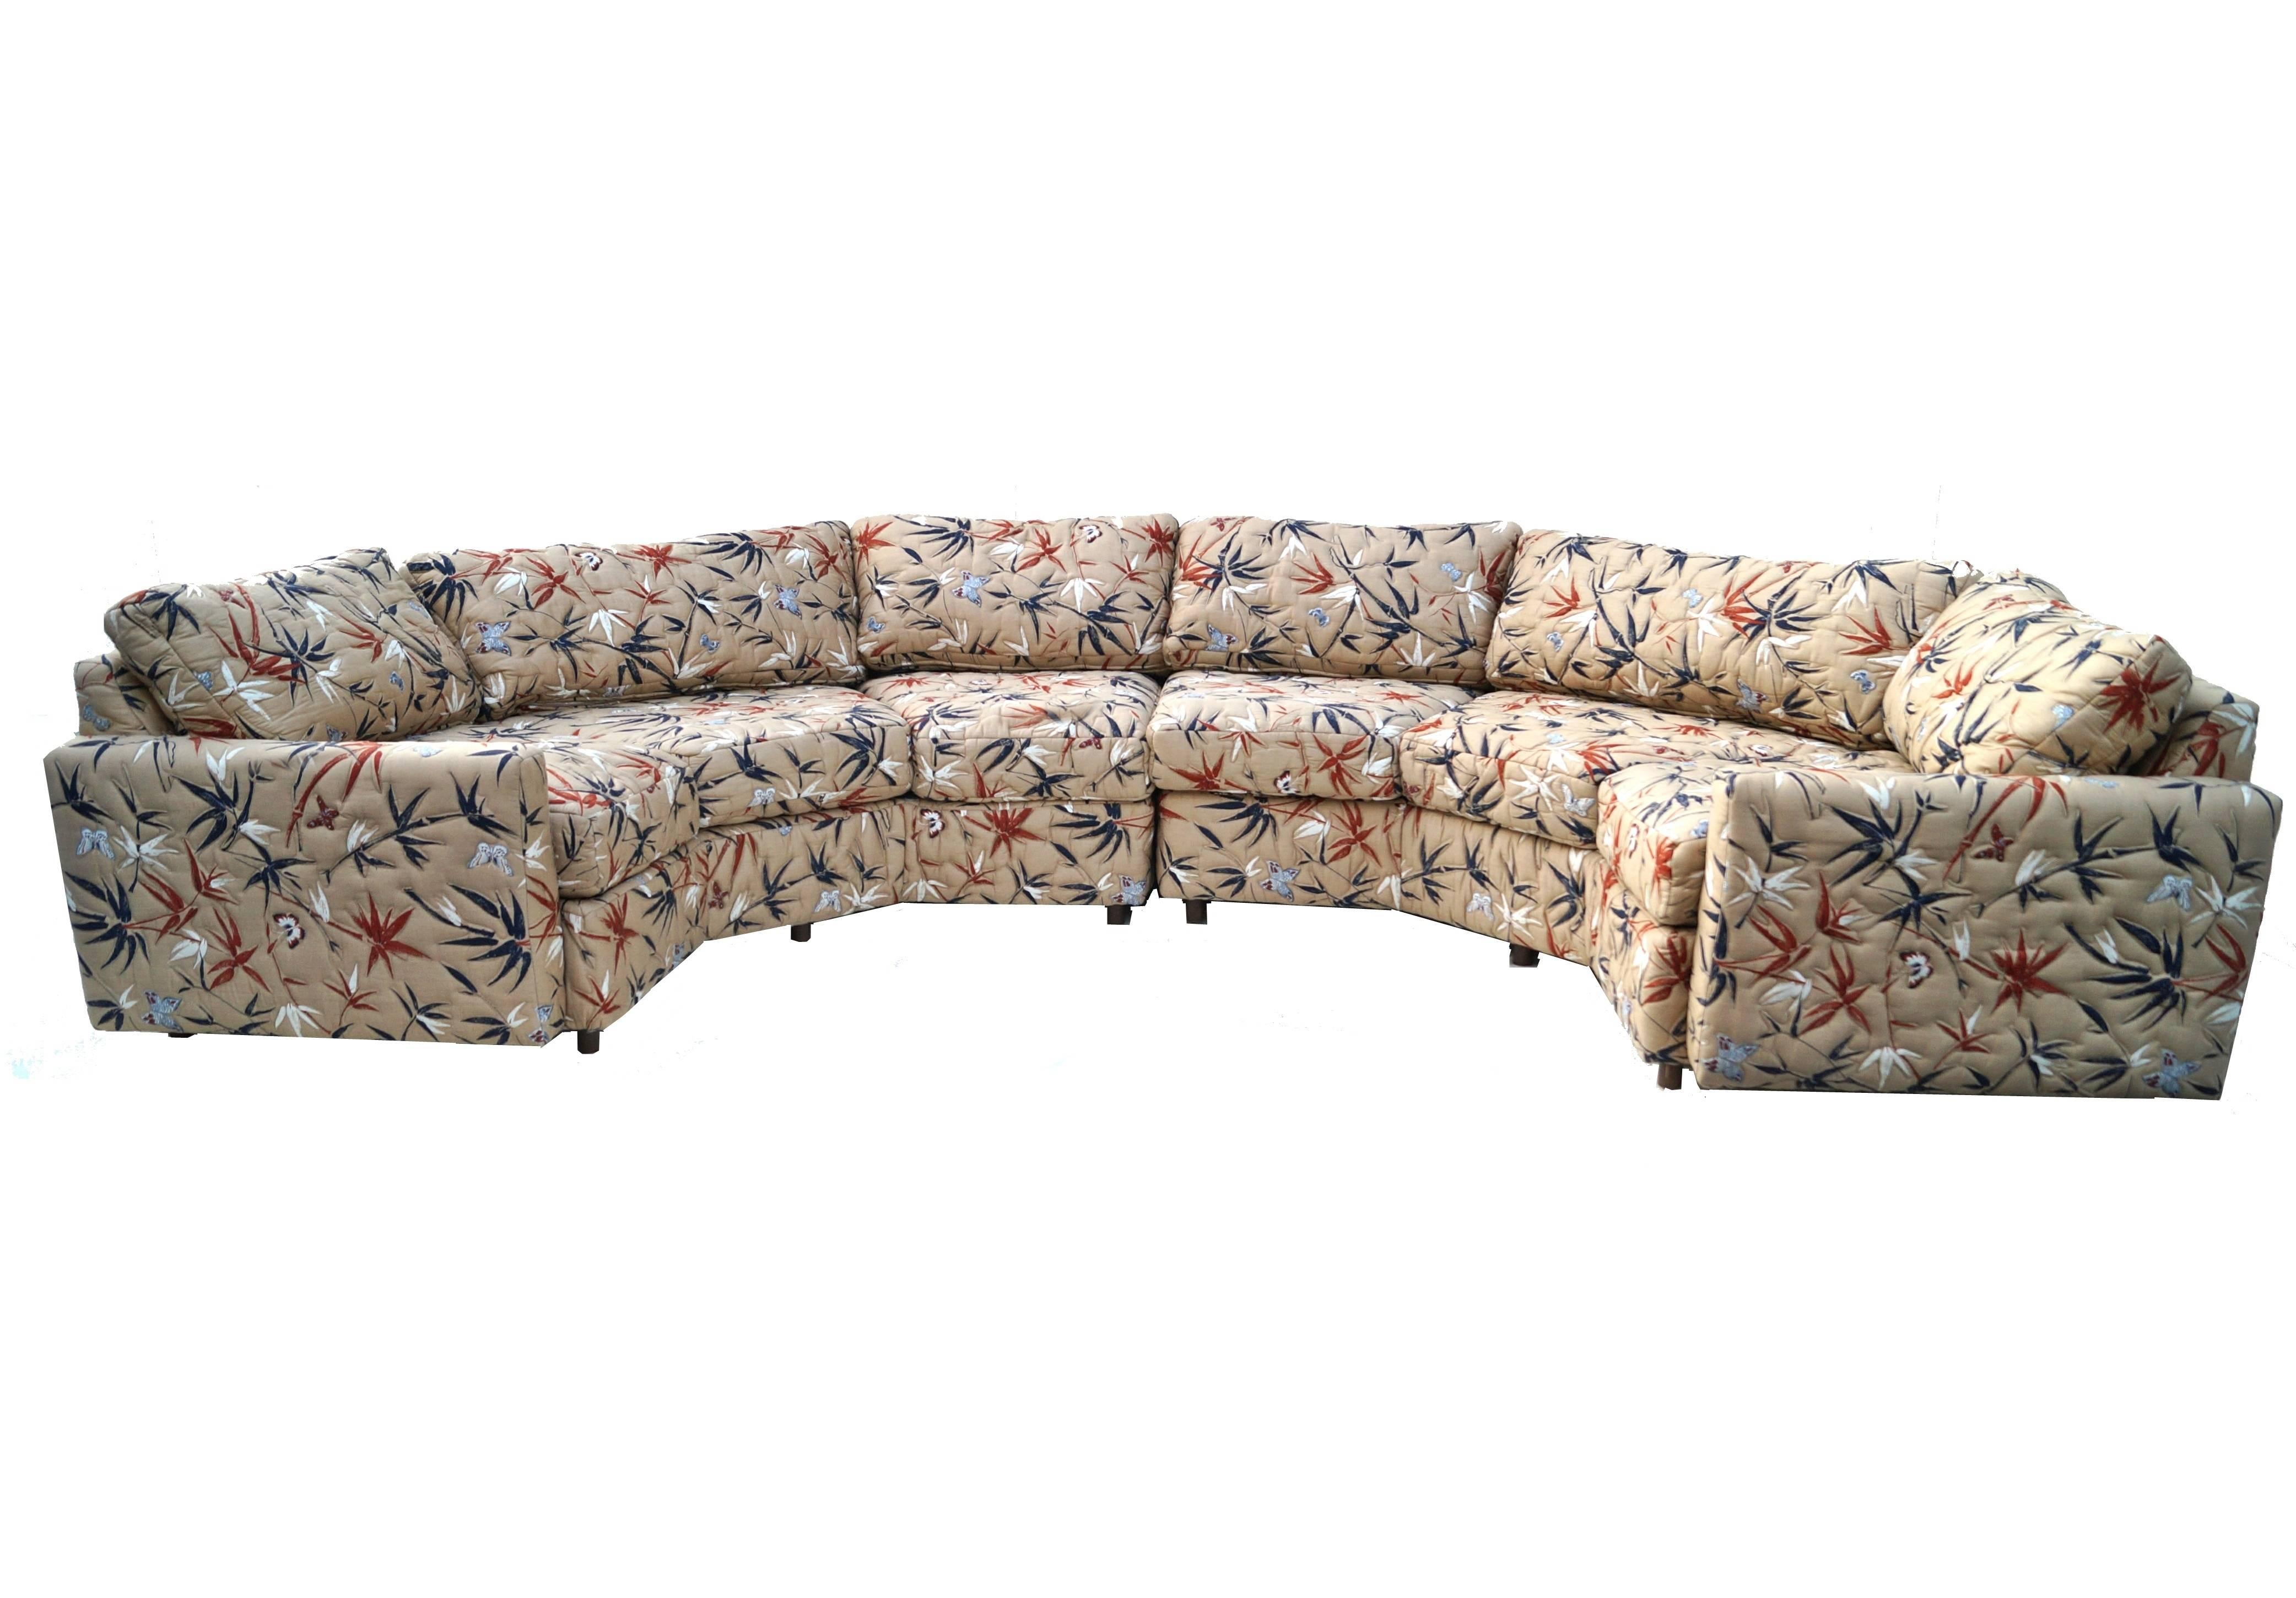 This beautiful mid-century modern two-piece sofa has three sides each when separated. When together it has 5 sides, not including the sides where the armrests go. It is a tan color with Black and rust bamboo and butterflies. Would go great with